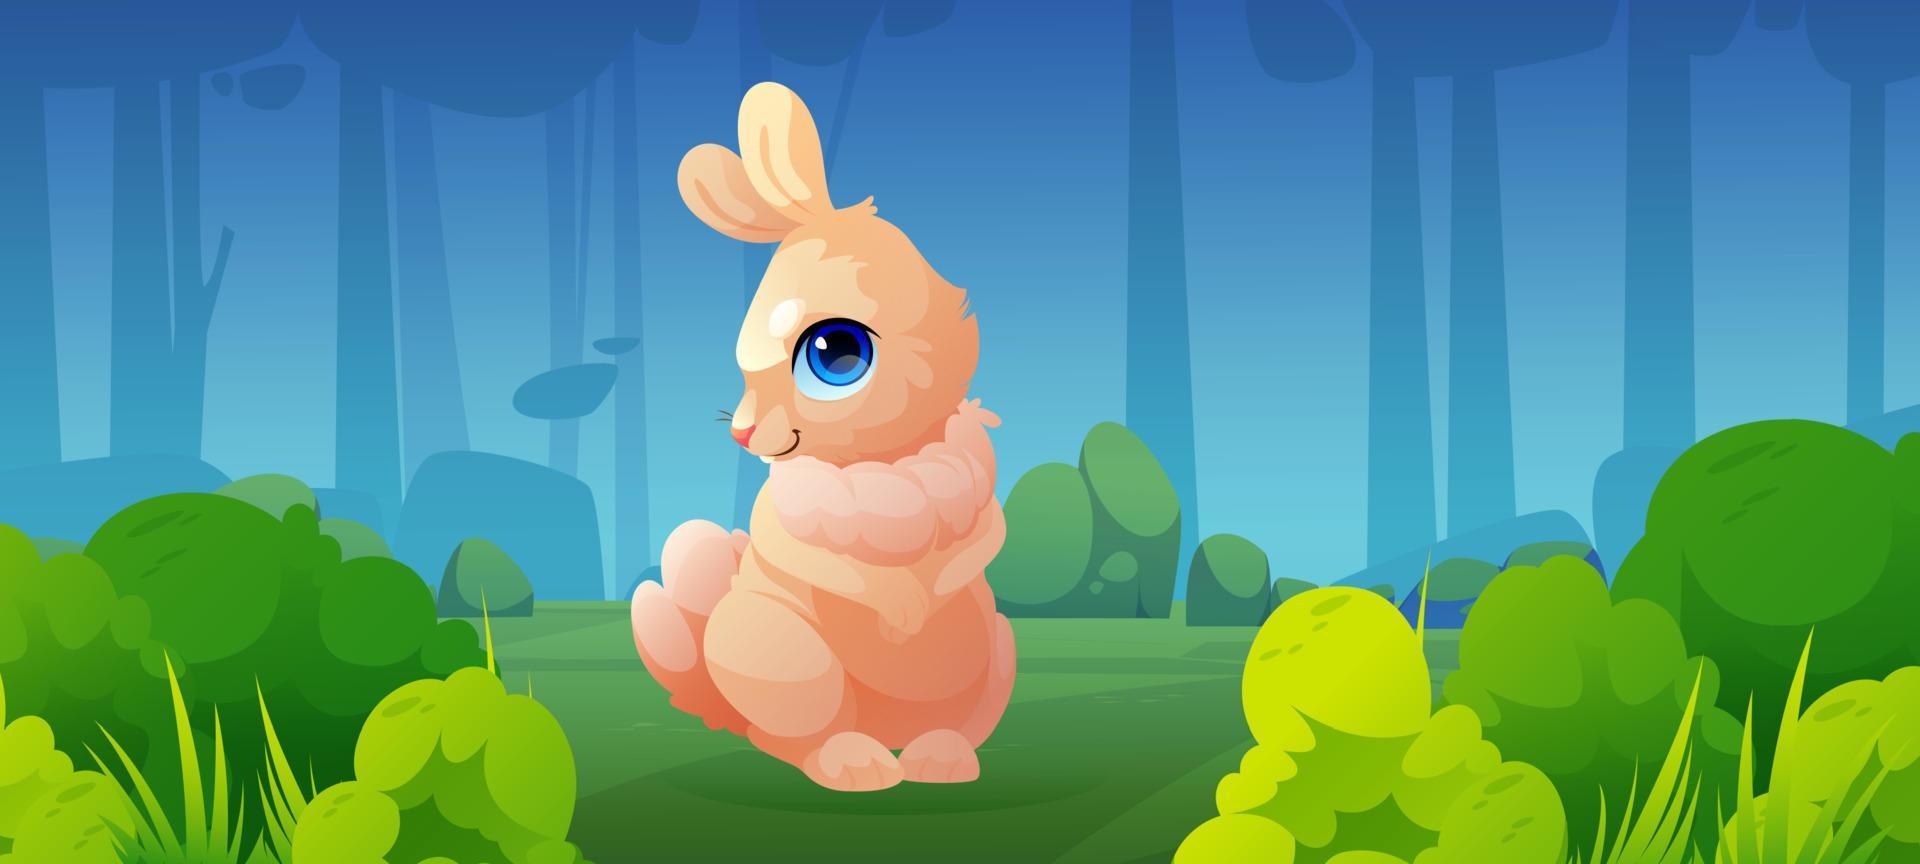 Cute hare or bunny on glade in forest vector